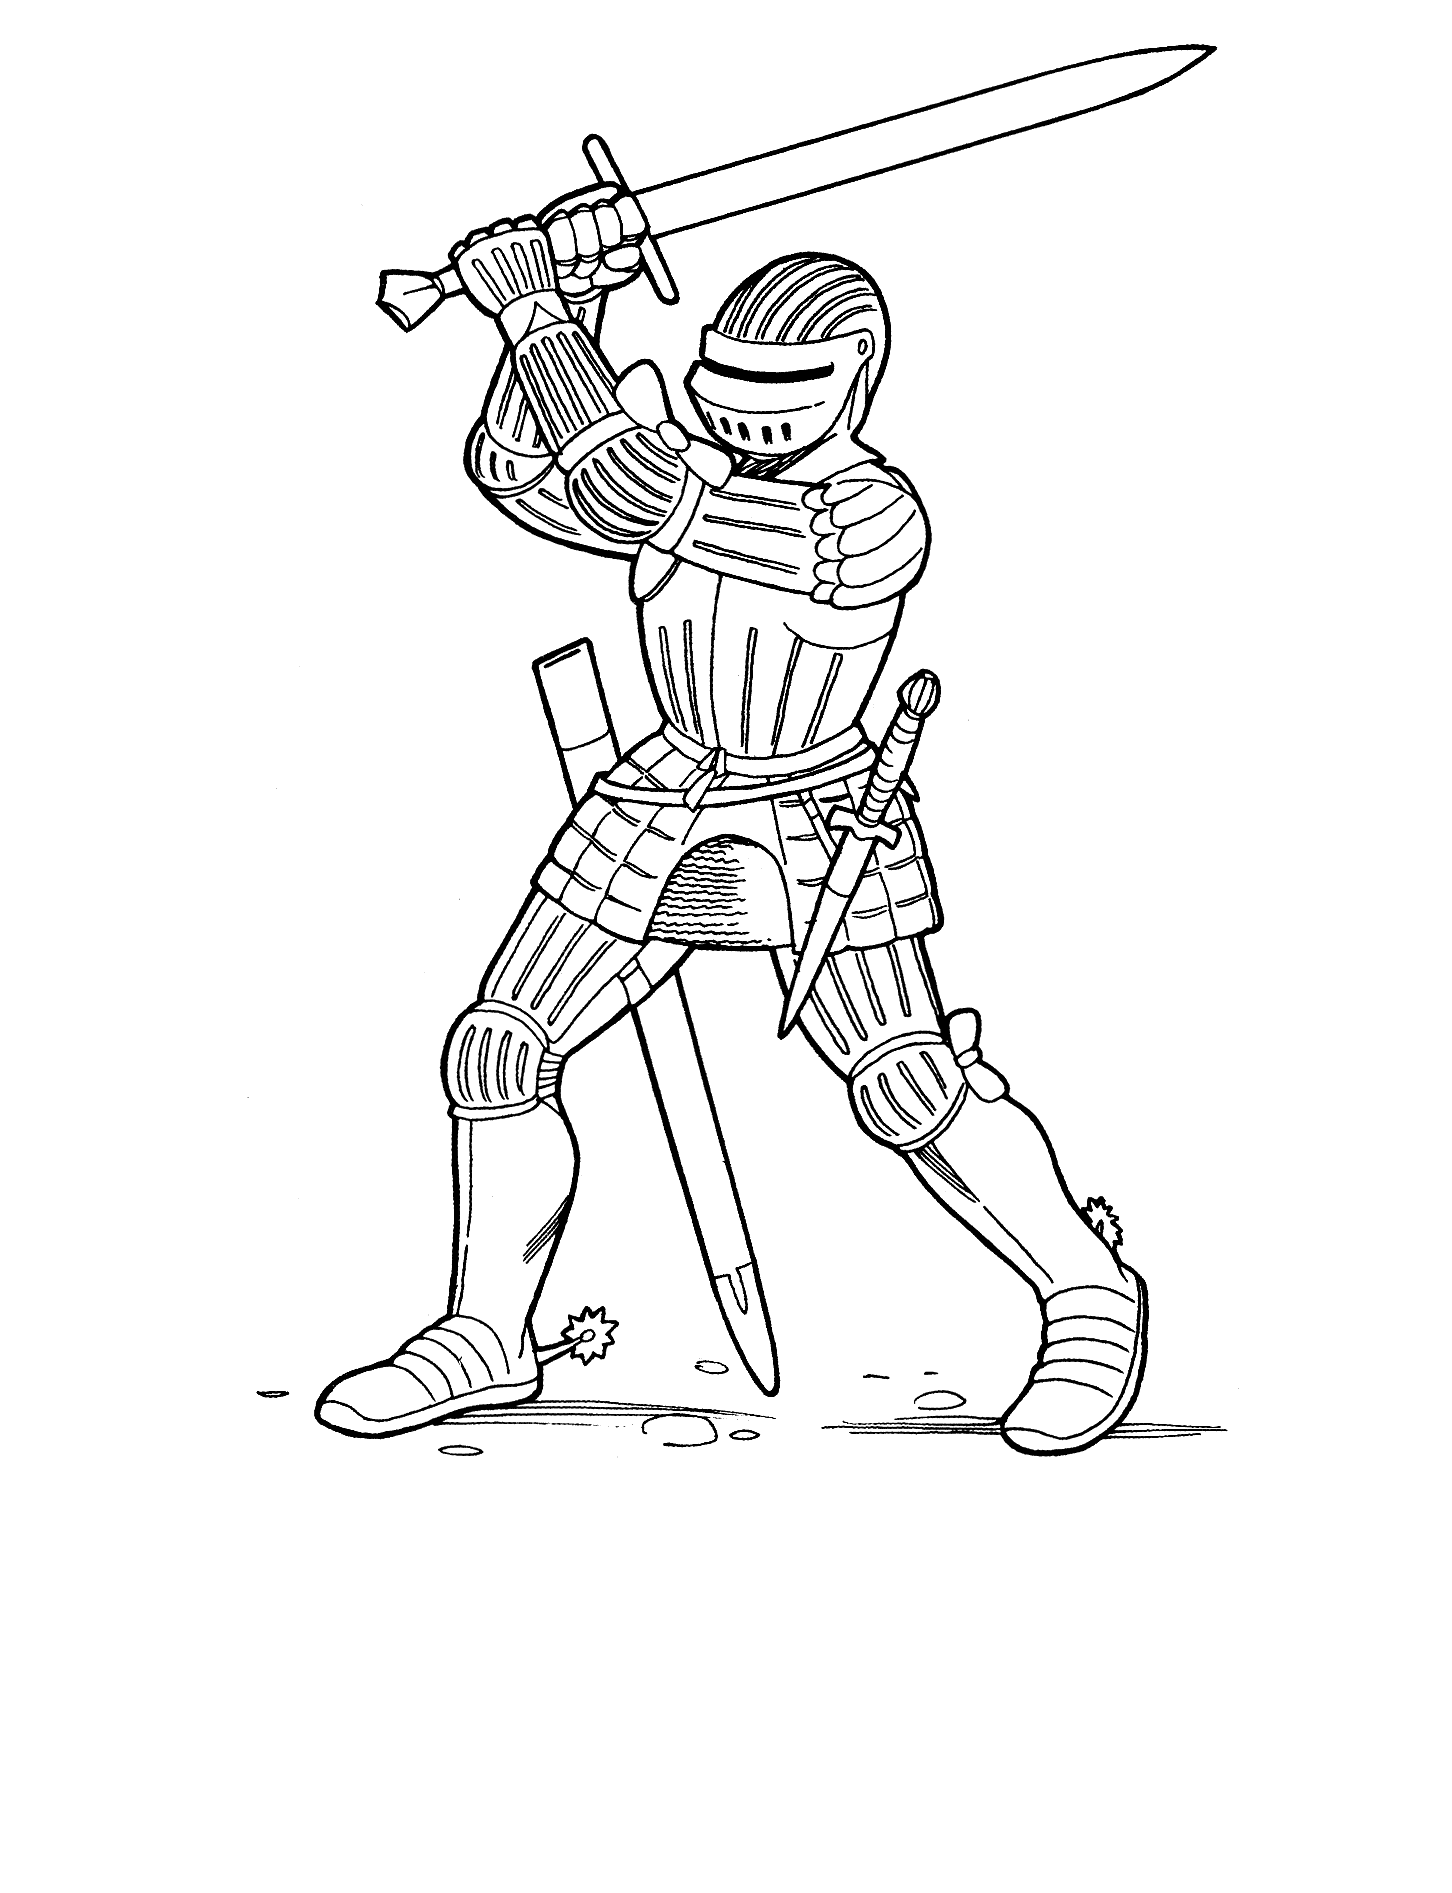 Knight coloring #16, Download drawings